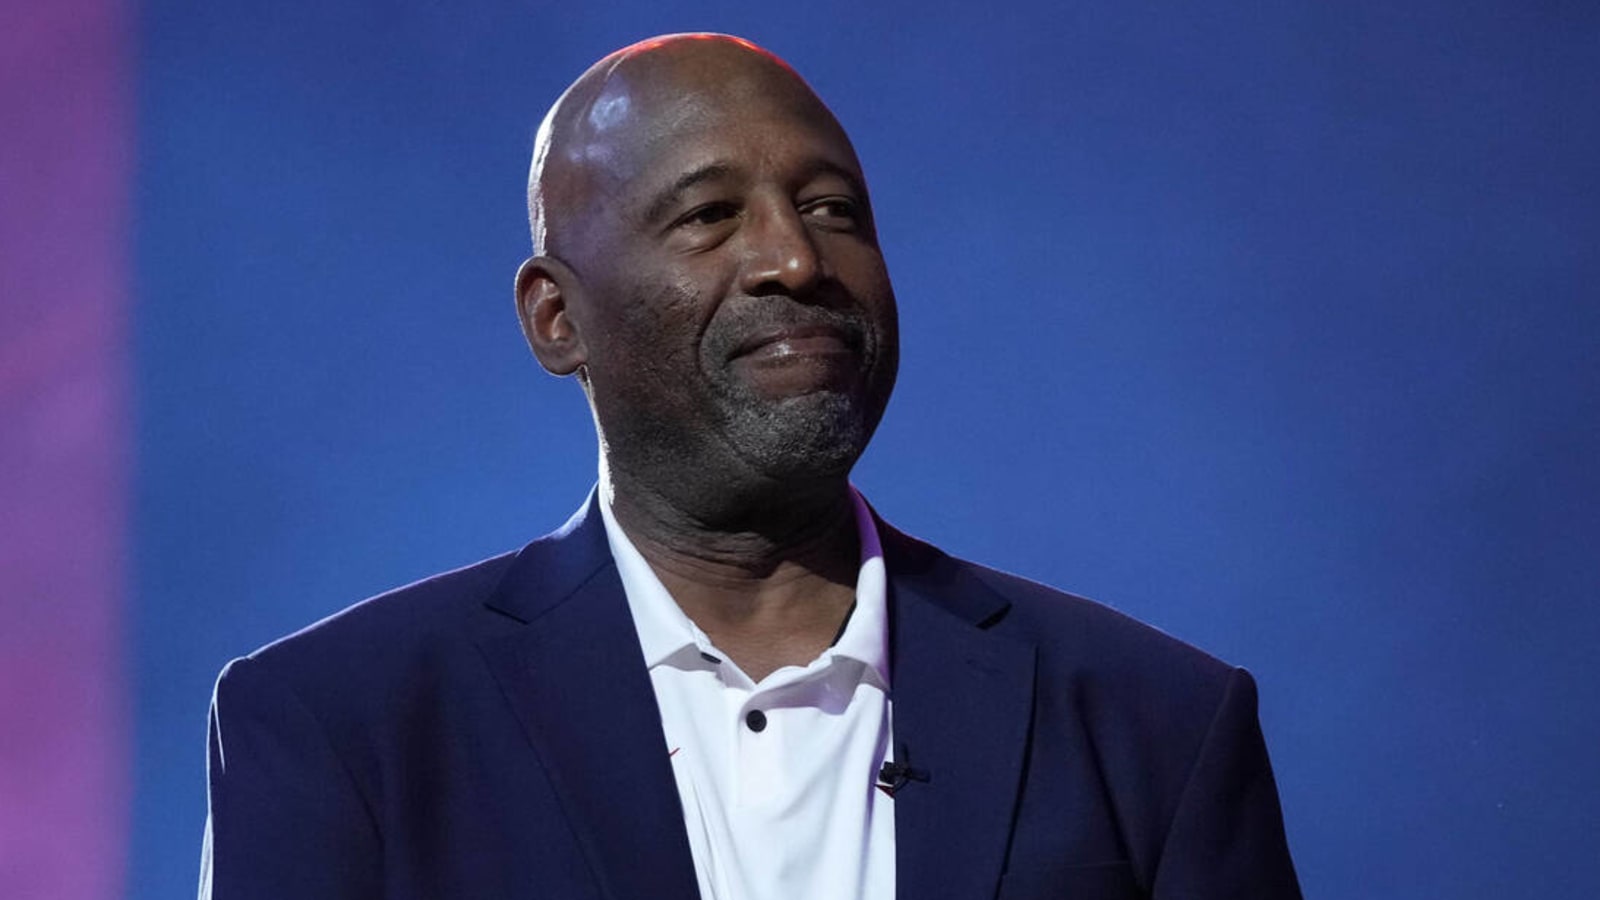 James Worthy got exemption from infamous North Carolina facial hair policy